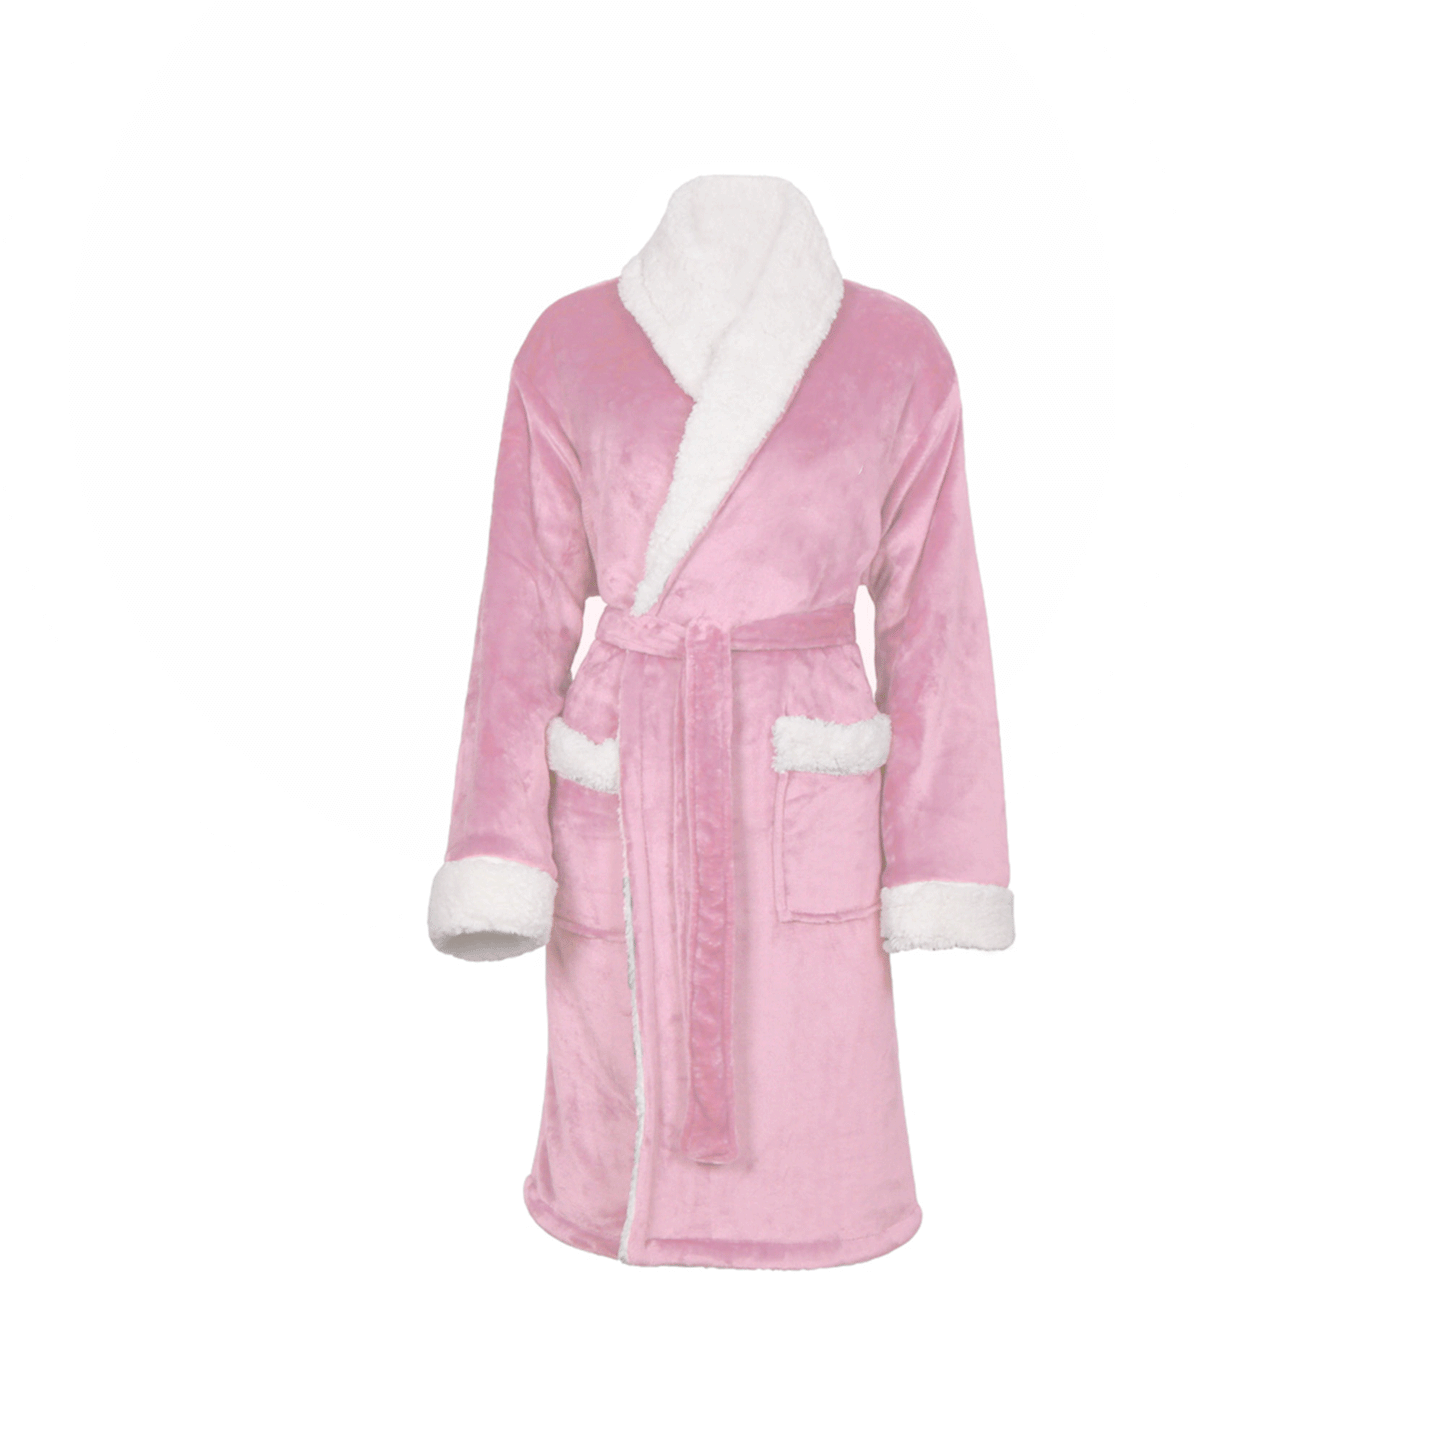 Personalised Sherpa Fleece Dressing Gown - Front and Back Embroidery - Duncan Stewart 1978 Pink-Large-Extra-Large Duncan Stewart 1978